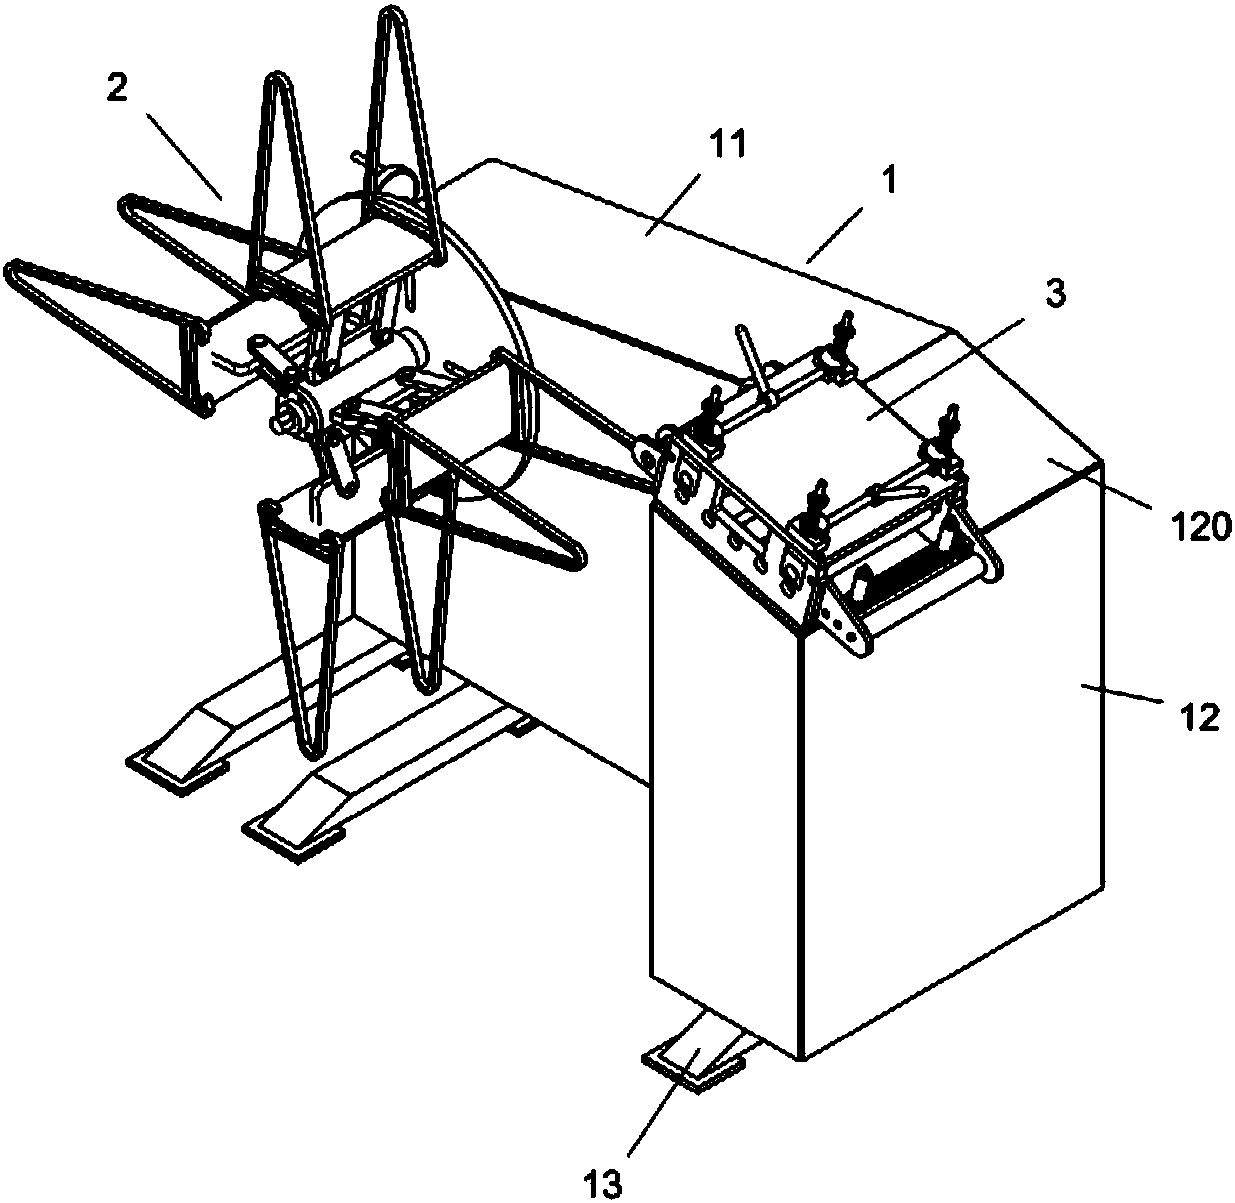 Cloth winding device of textile dyeing and cloth-collecting equipment